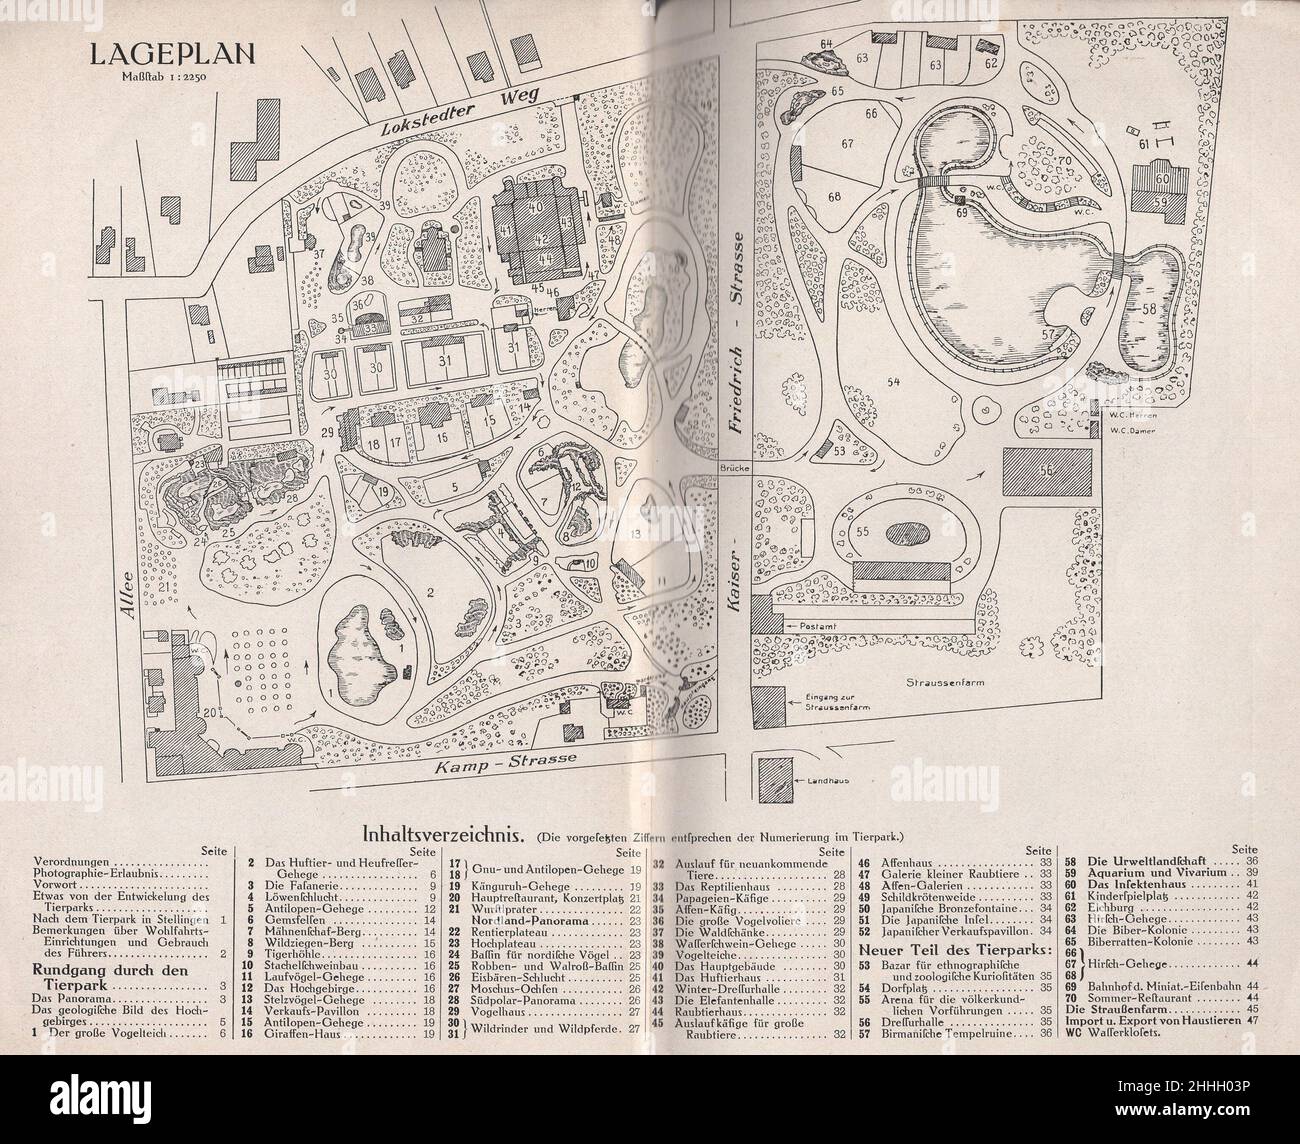 Antique /vintage historical Imagines / Pictures  of full prospect / catalogue of  The German animal merchant , Zoo founder and zoo director Carl Hagenbeck ( businessman)  from Hamburg 1911. : Lageplan /Location plan / Site map of the zoo  ADDITIONAL-RIGHTS-CLEARANCE-INFO-NOT-AVAILABLE Stock Photo